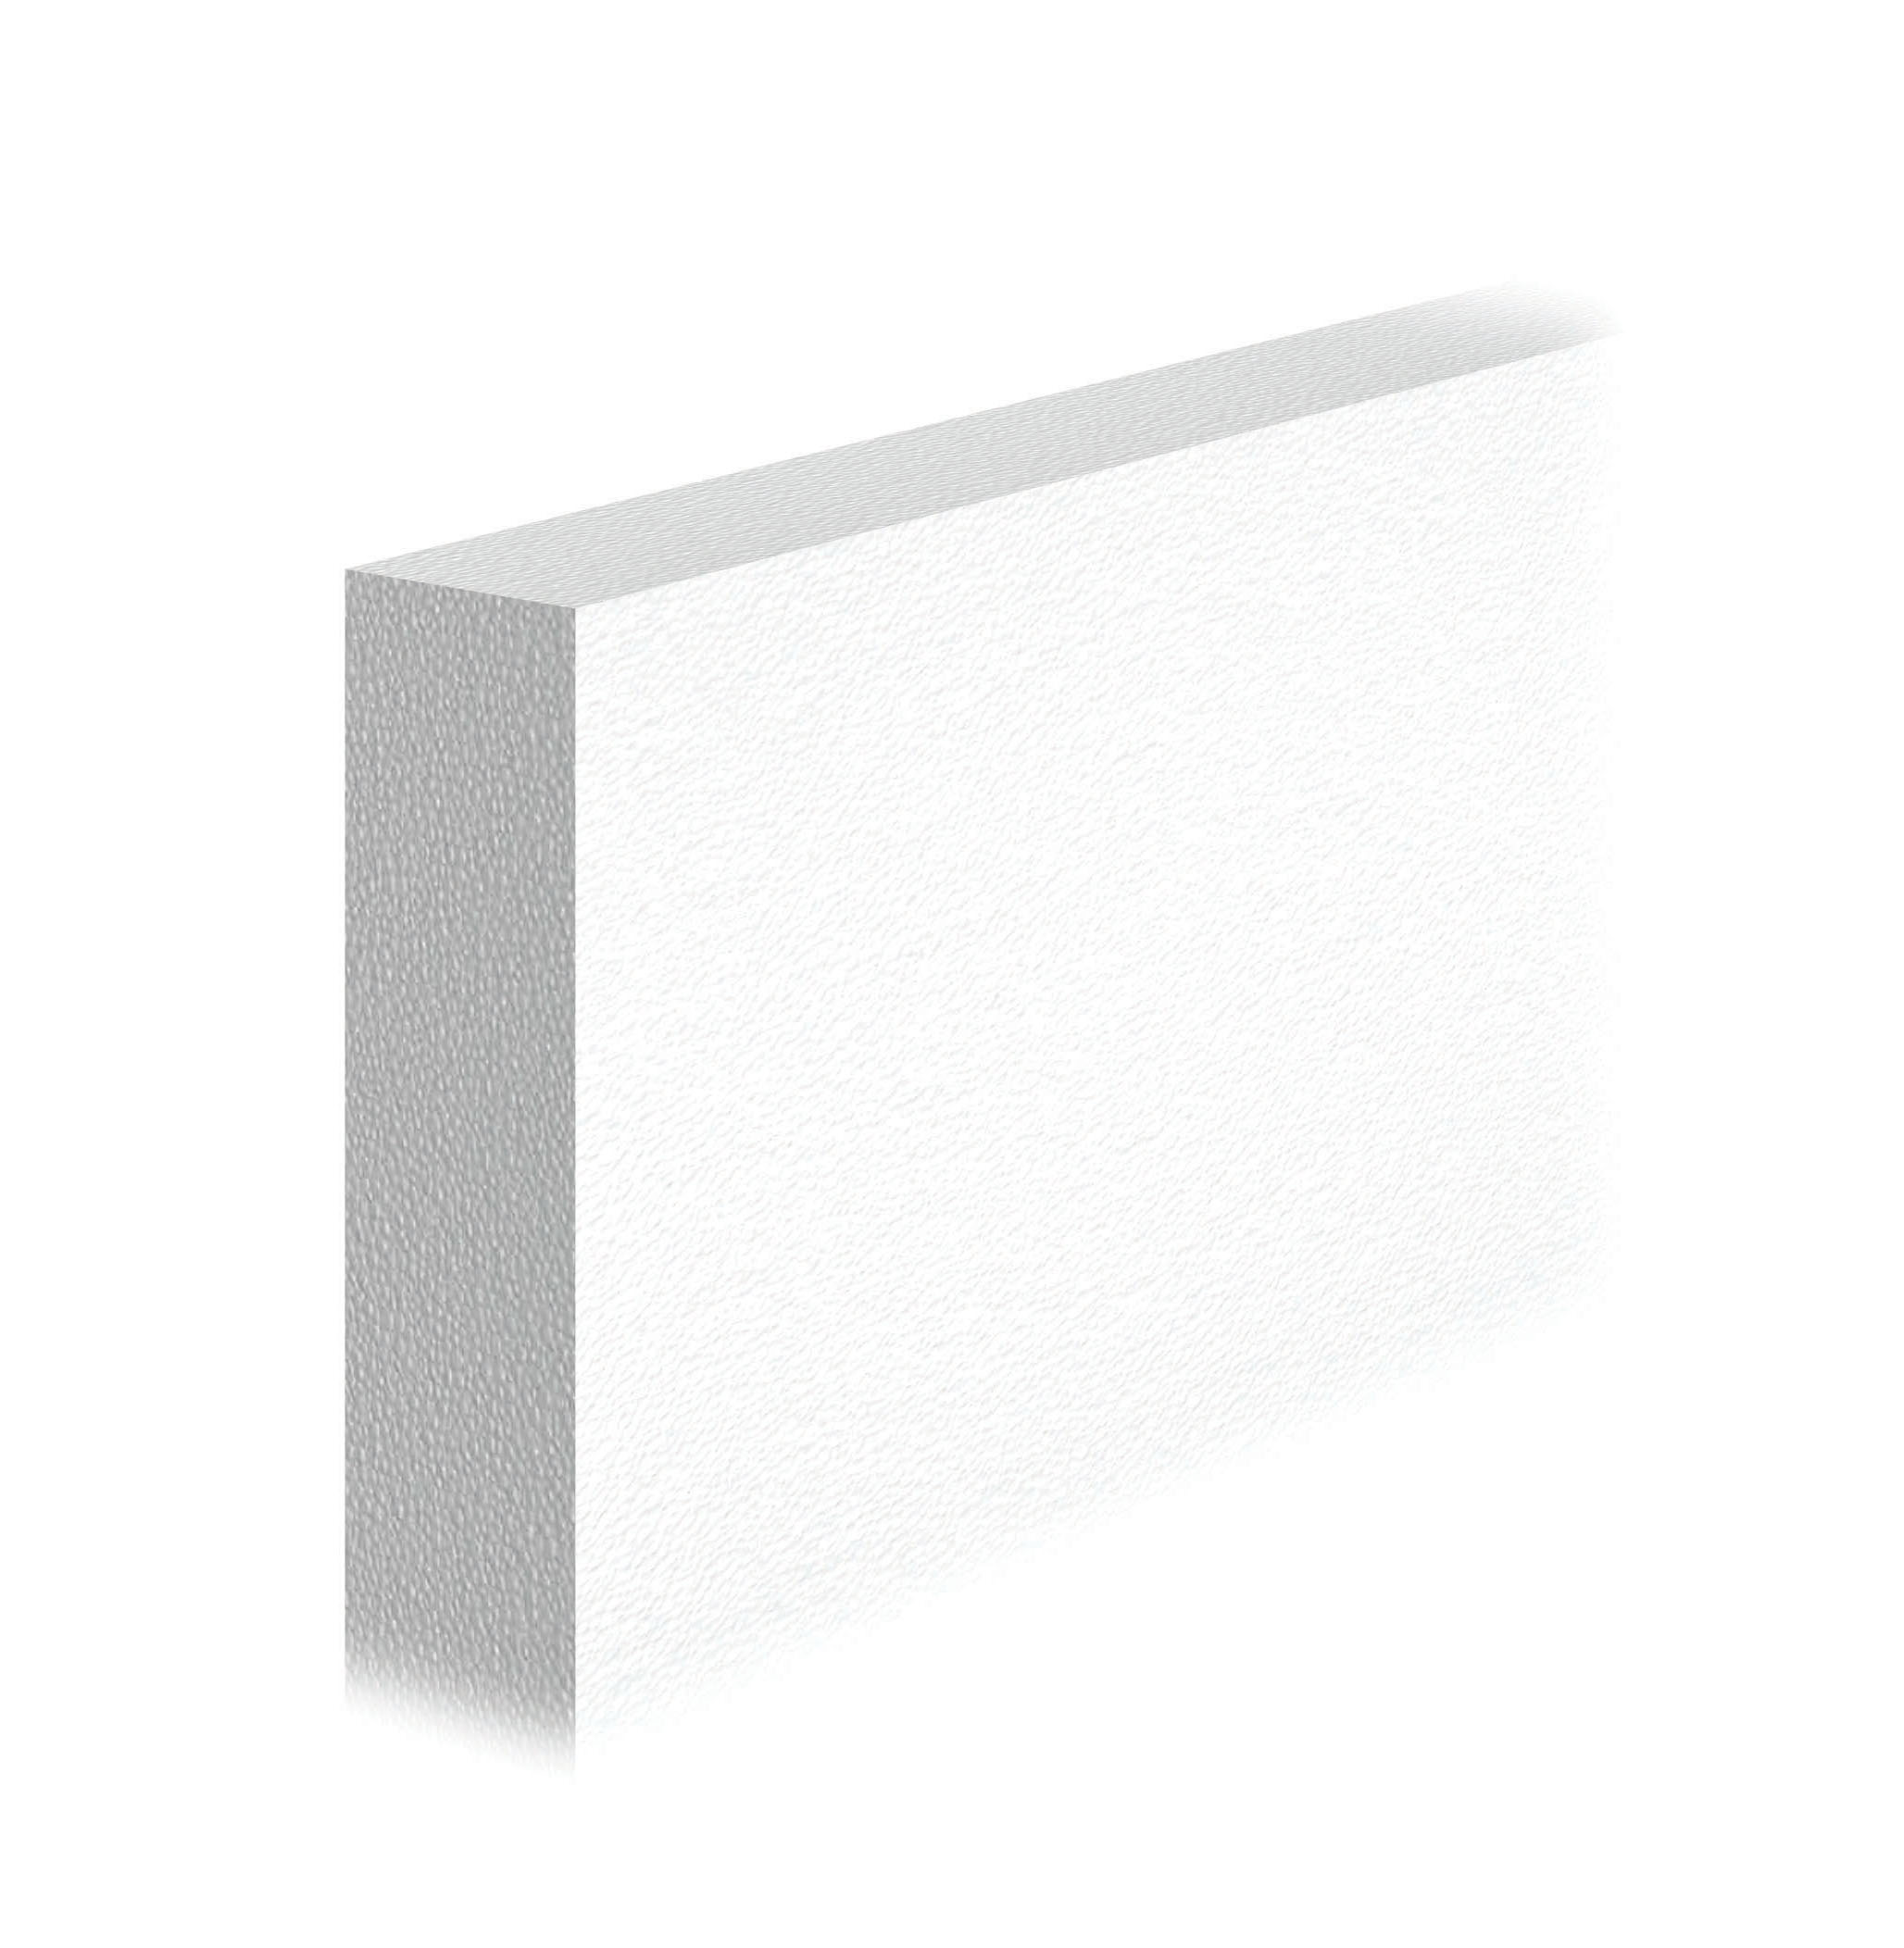 WHITE EPS 70: EPS 70 thermal insulation panel